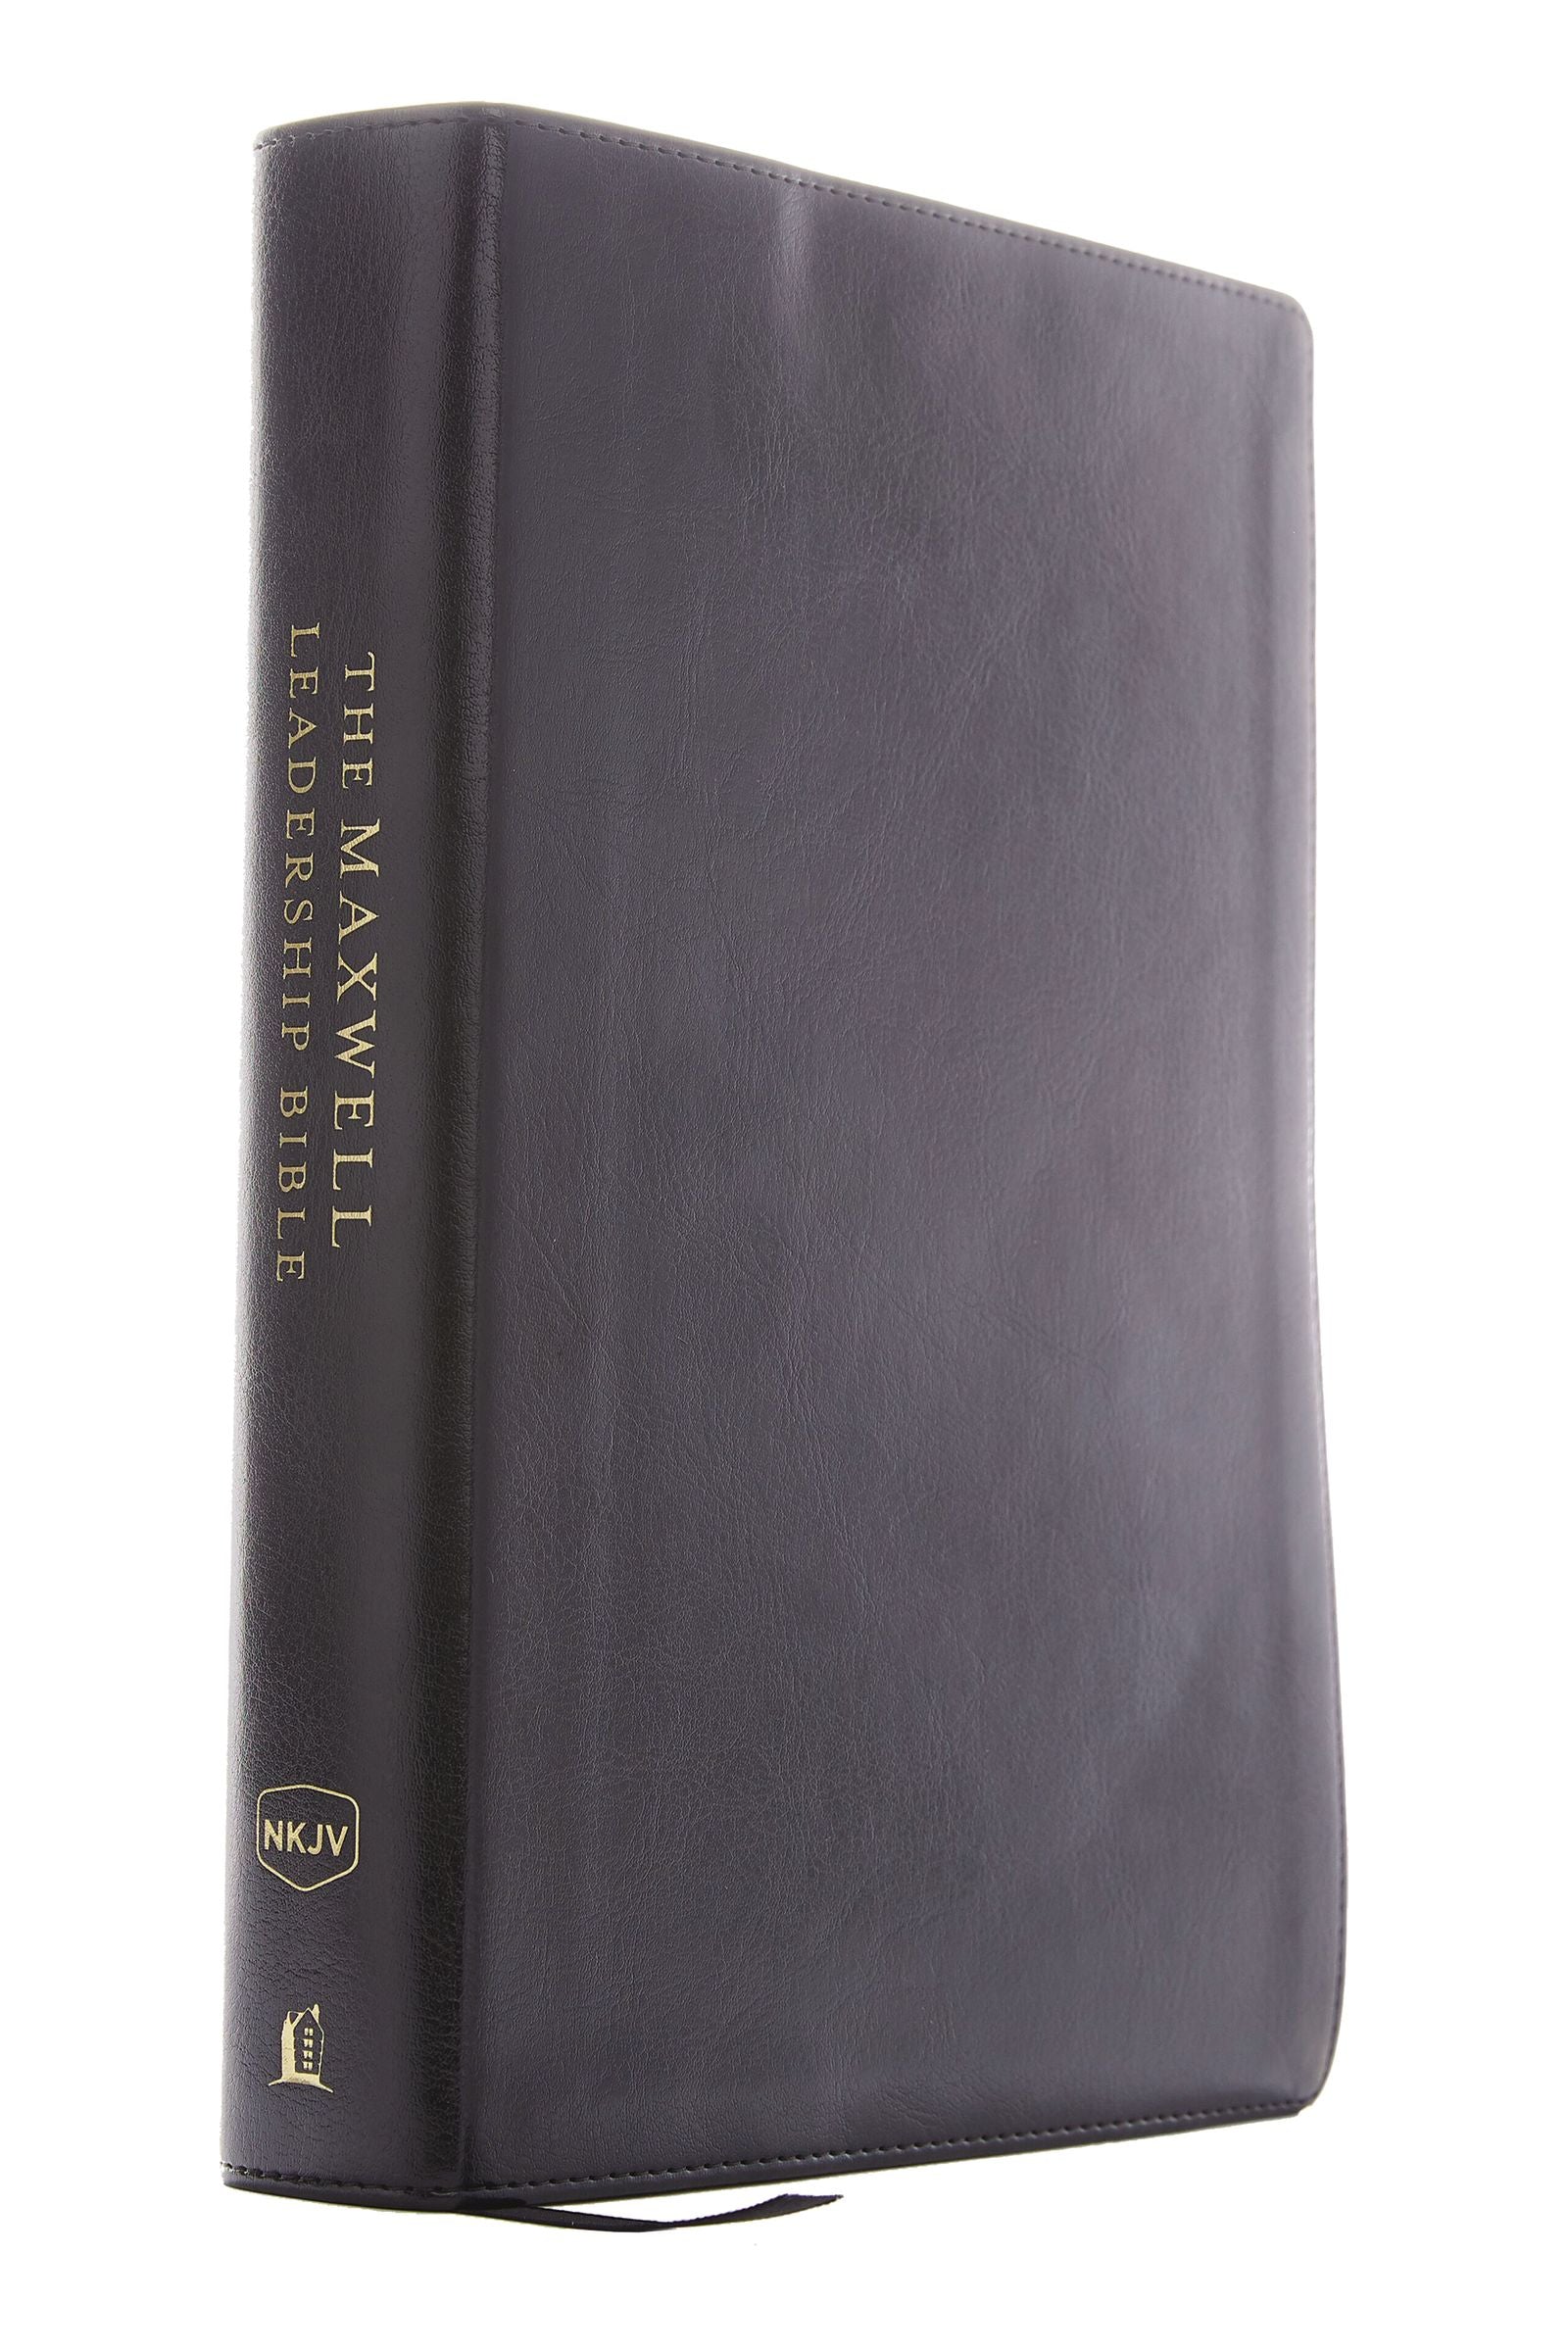 Image of John C. Maxwell NKJV Leadership Bible, Black, Imitation Leather, Comfort Print, Lay Flat, Study Notes for Leaders Ribbon Marker Bible other